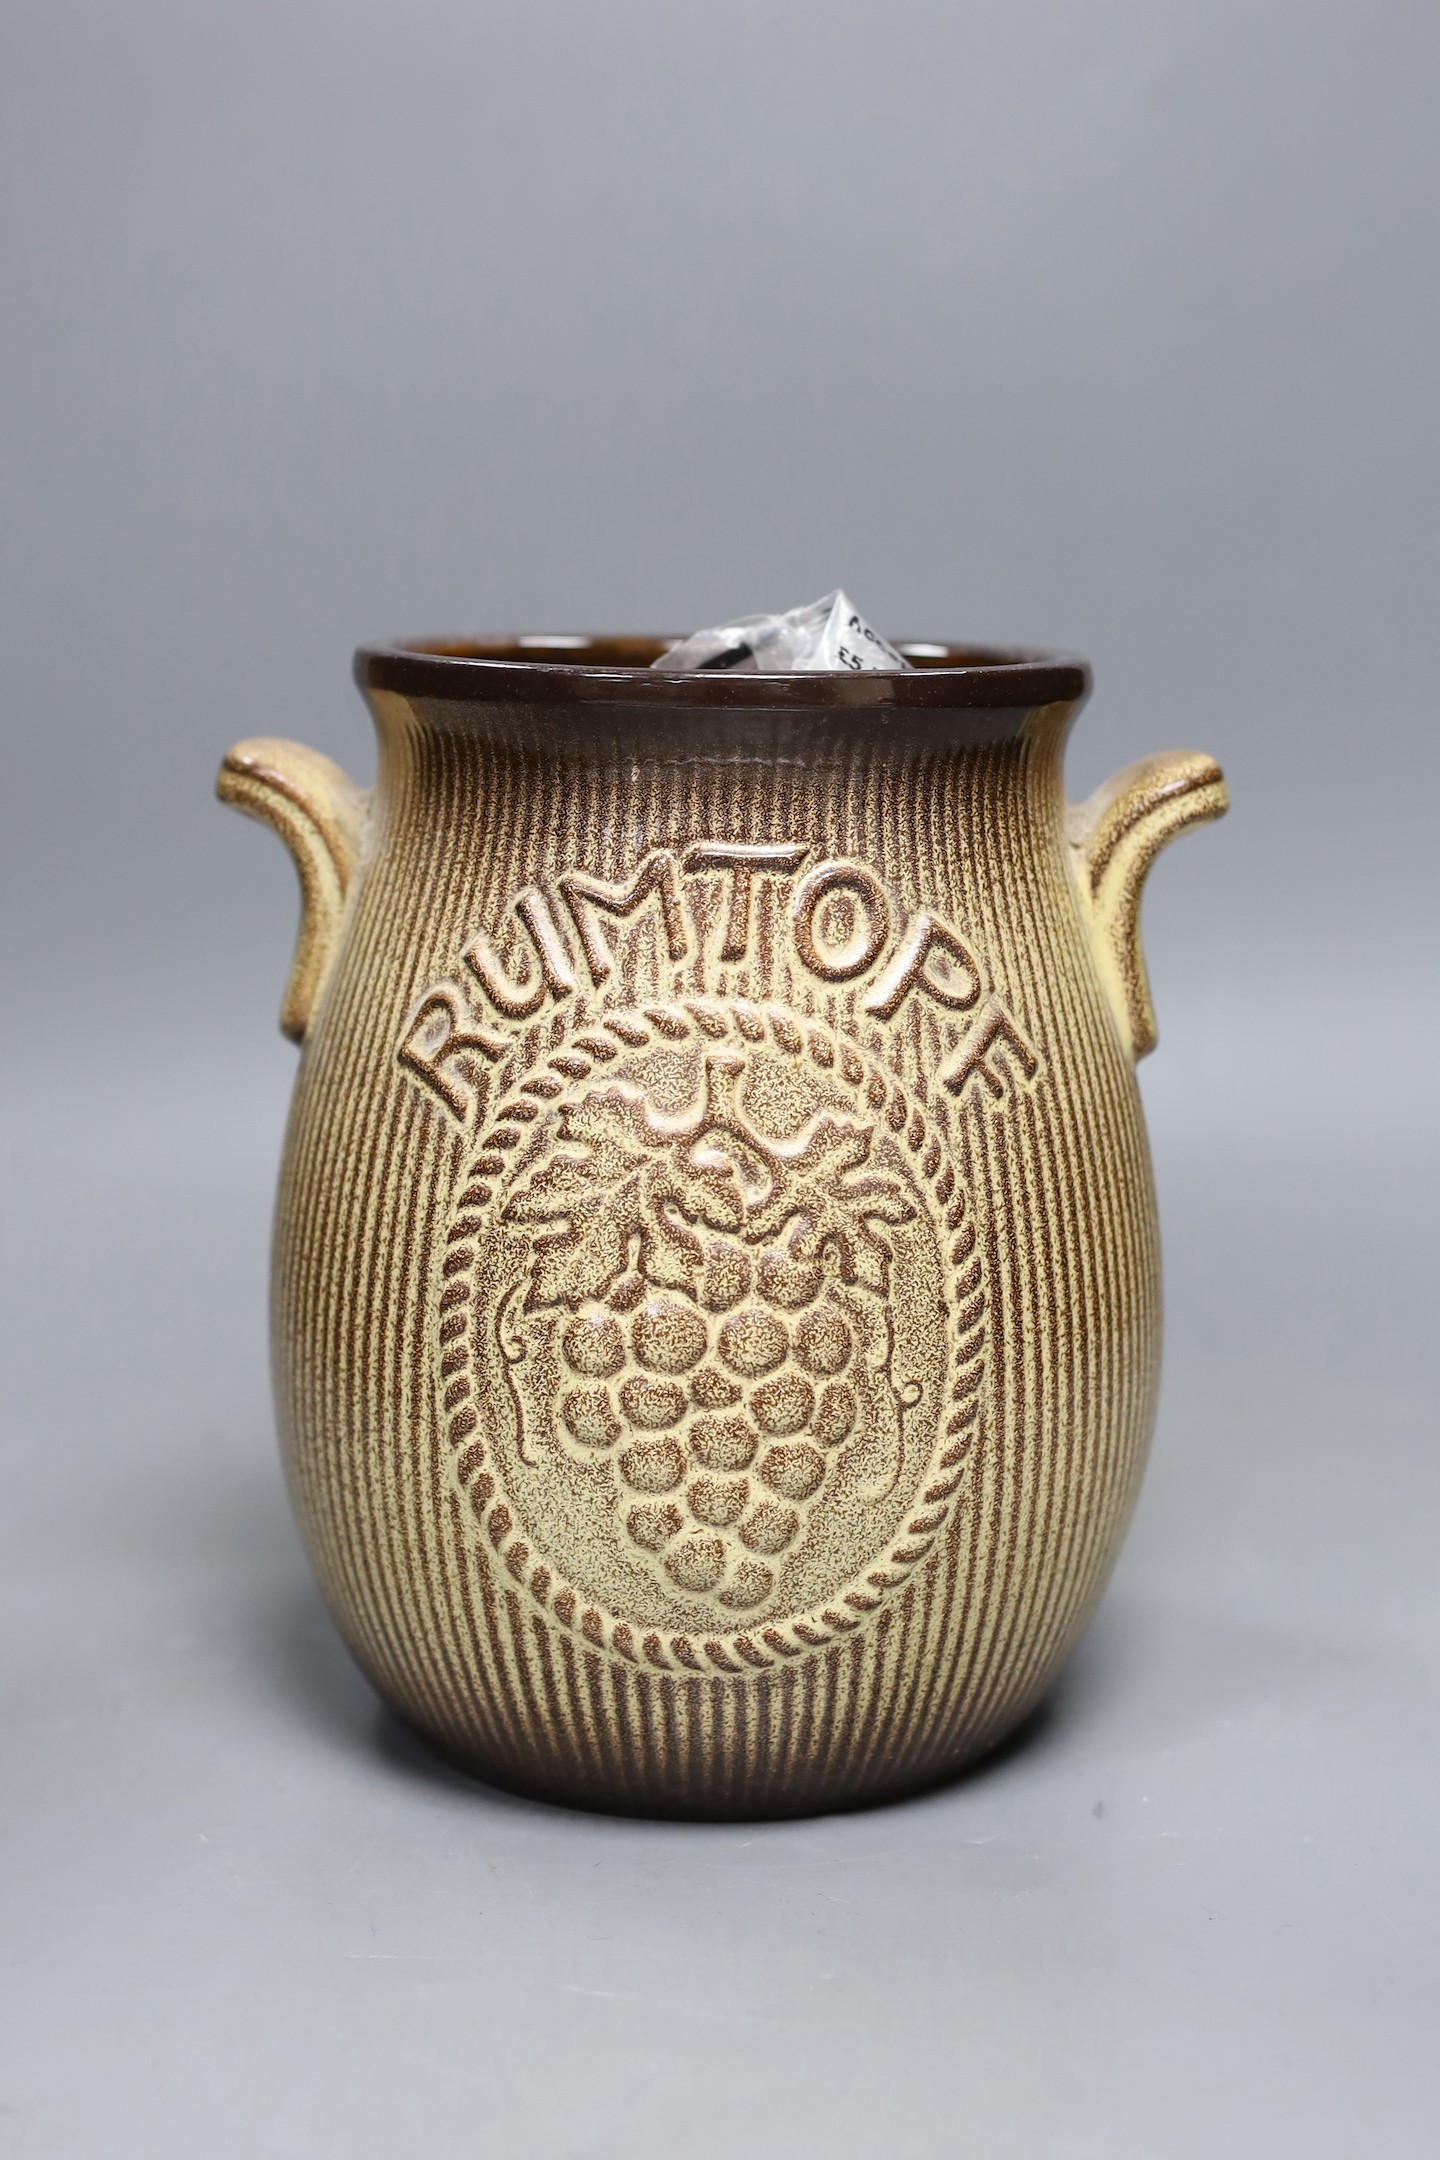 Automobilia, largely badges, in a pottery Rumtopf jar